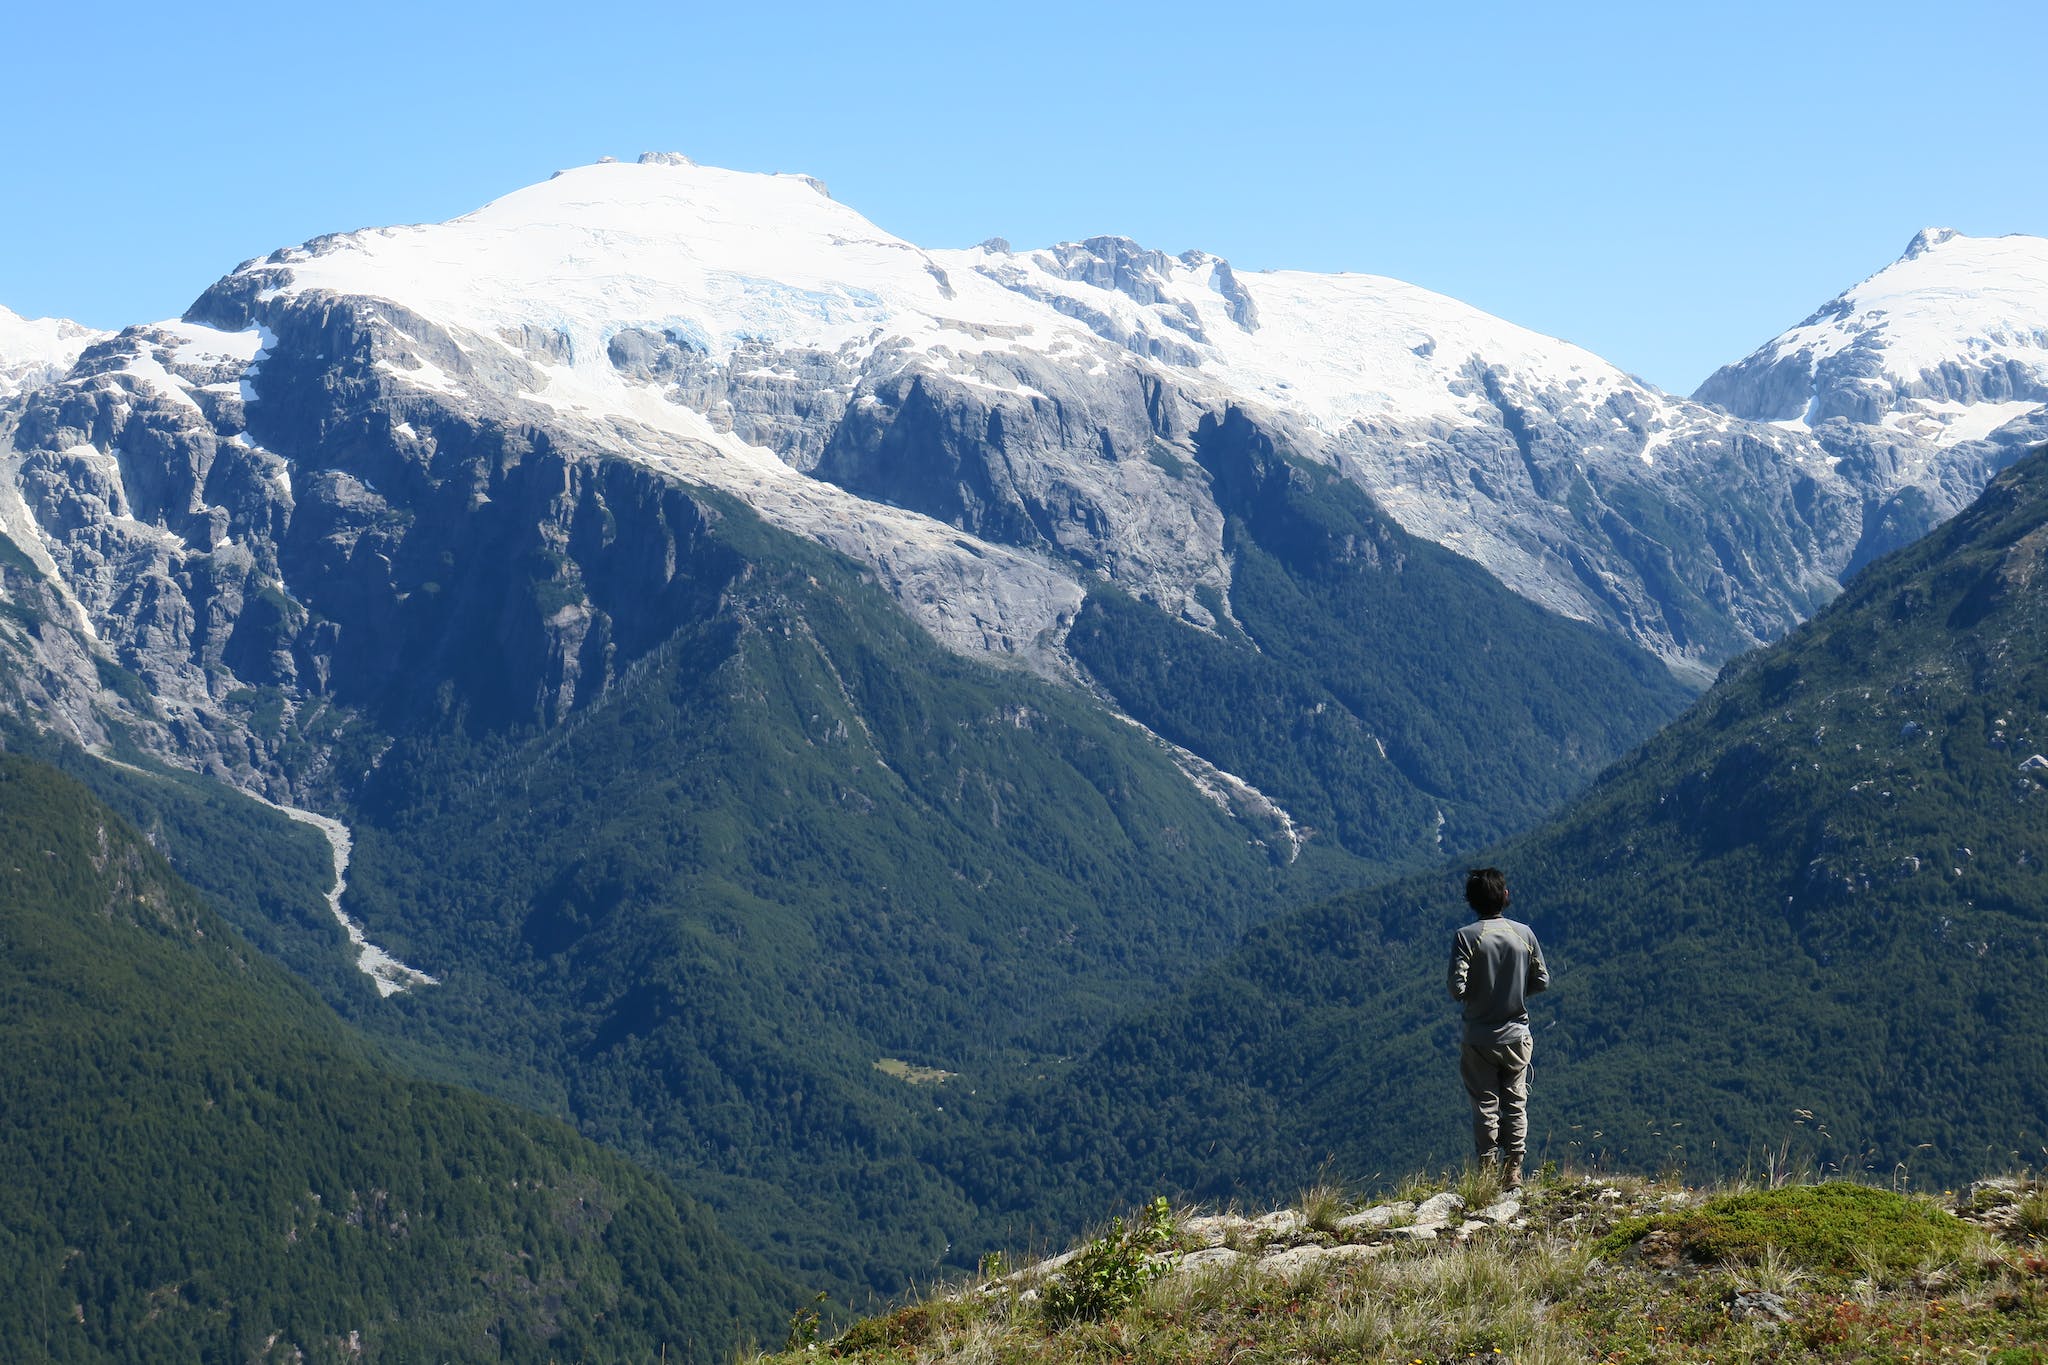 A man looks out at the forested mountains of the Ventisquero Valley, Chilean Patagonia